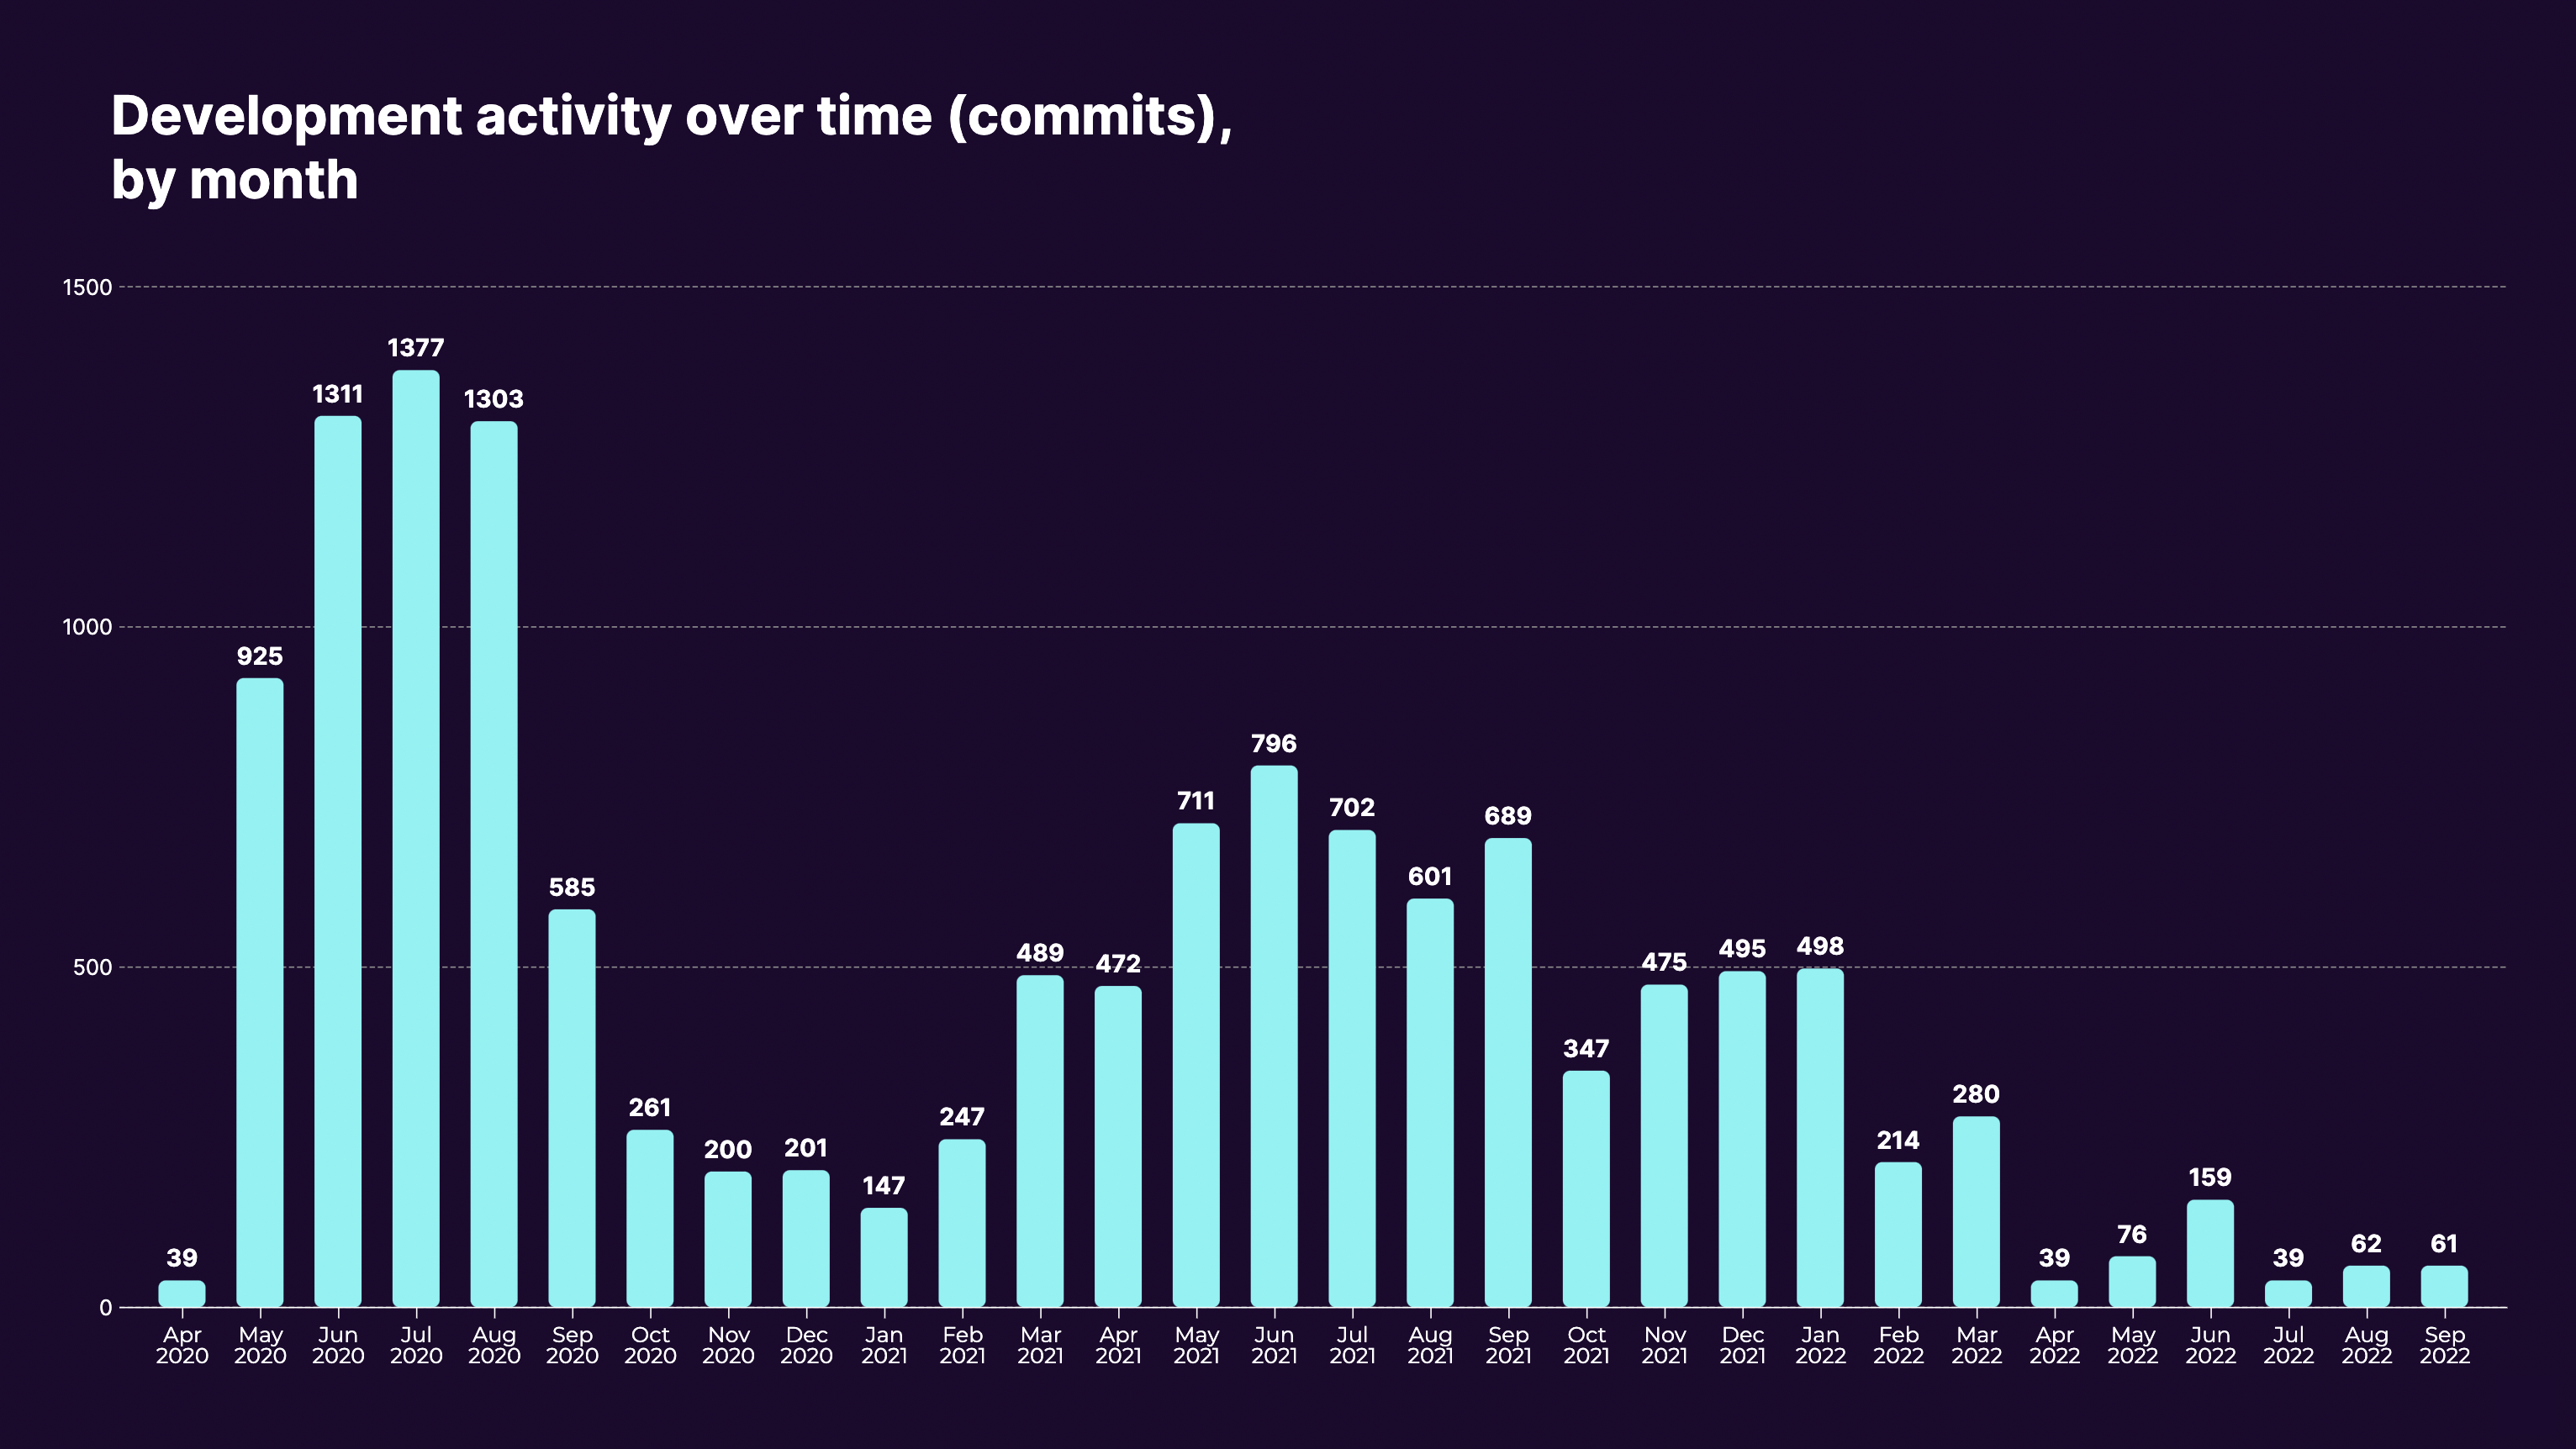 Development activity over time (commitments), by month